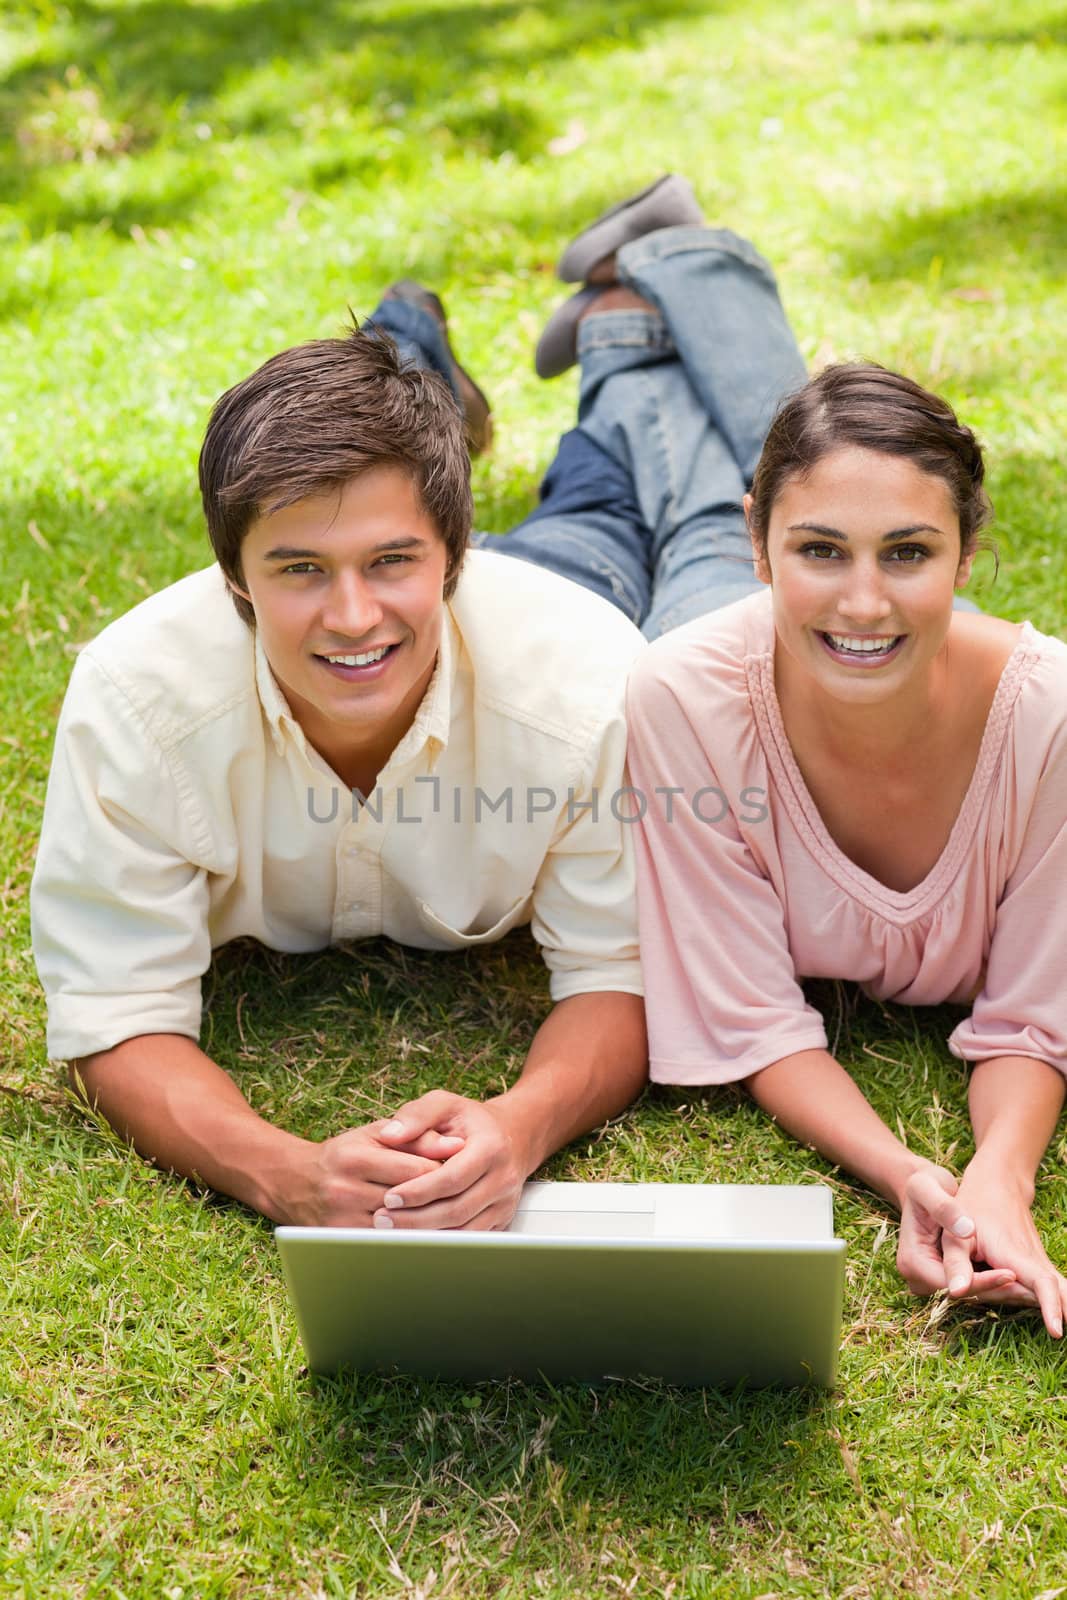 Two friends laughing while looking ahead as they use the laptop which is in front of them